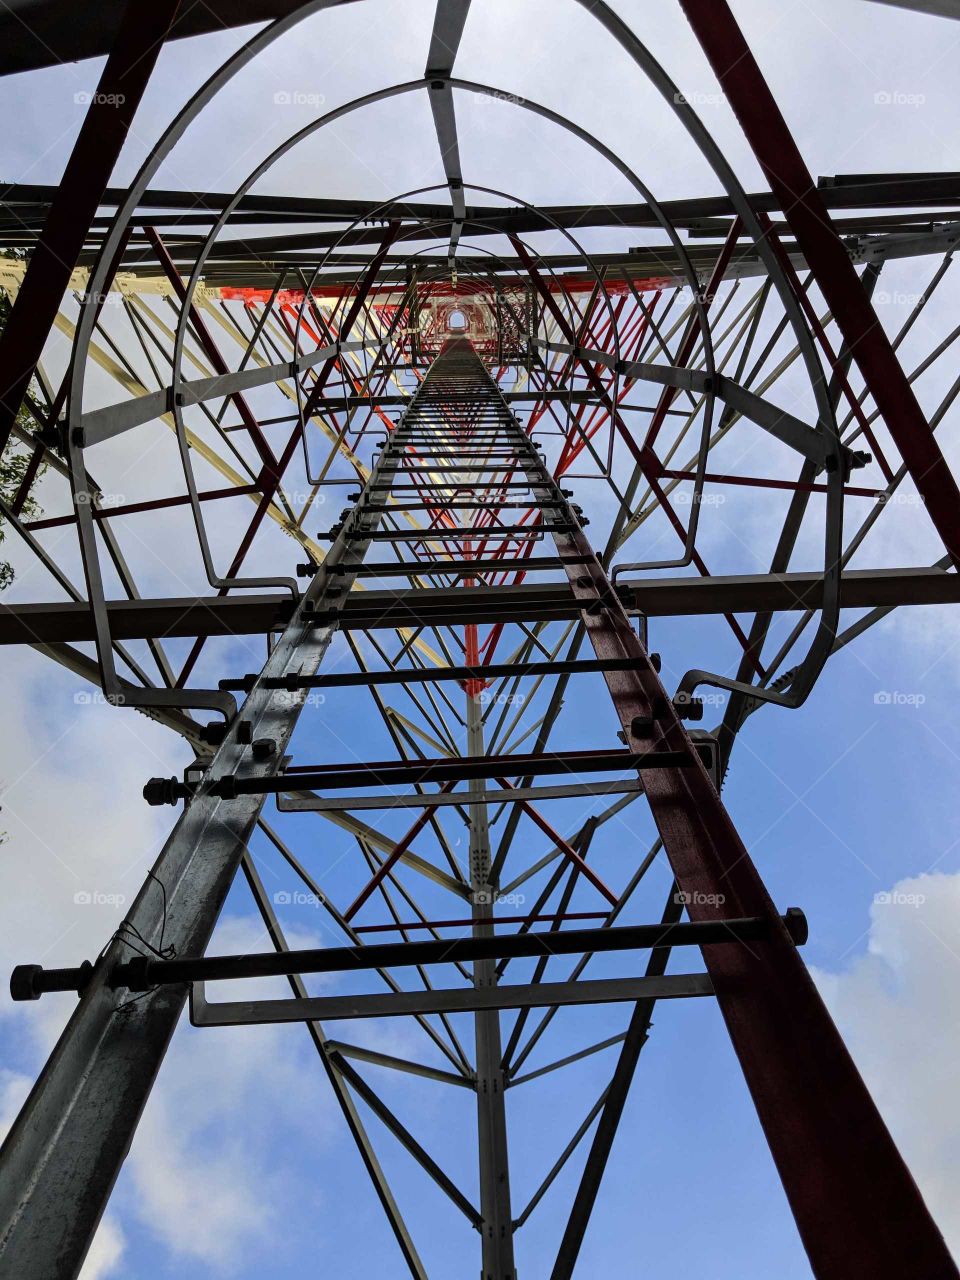 the view to the top from the bottom of a cell tower. this shows how tall the structure is.